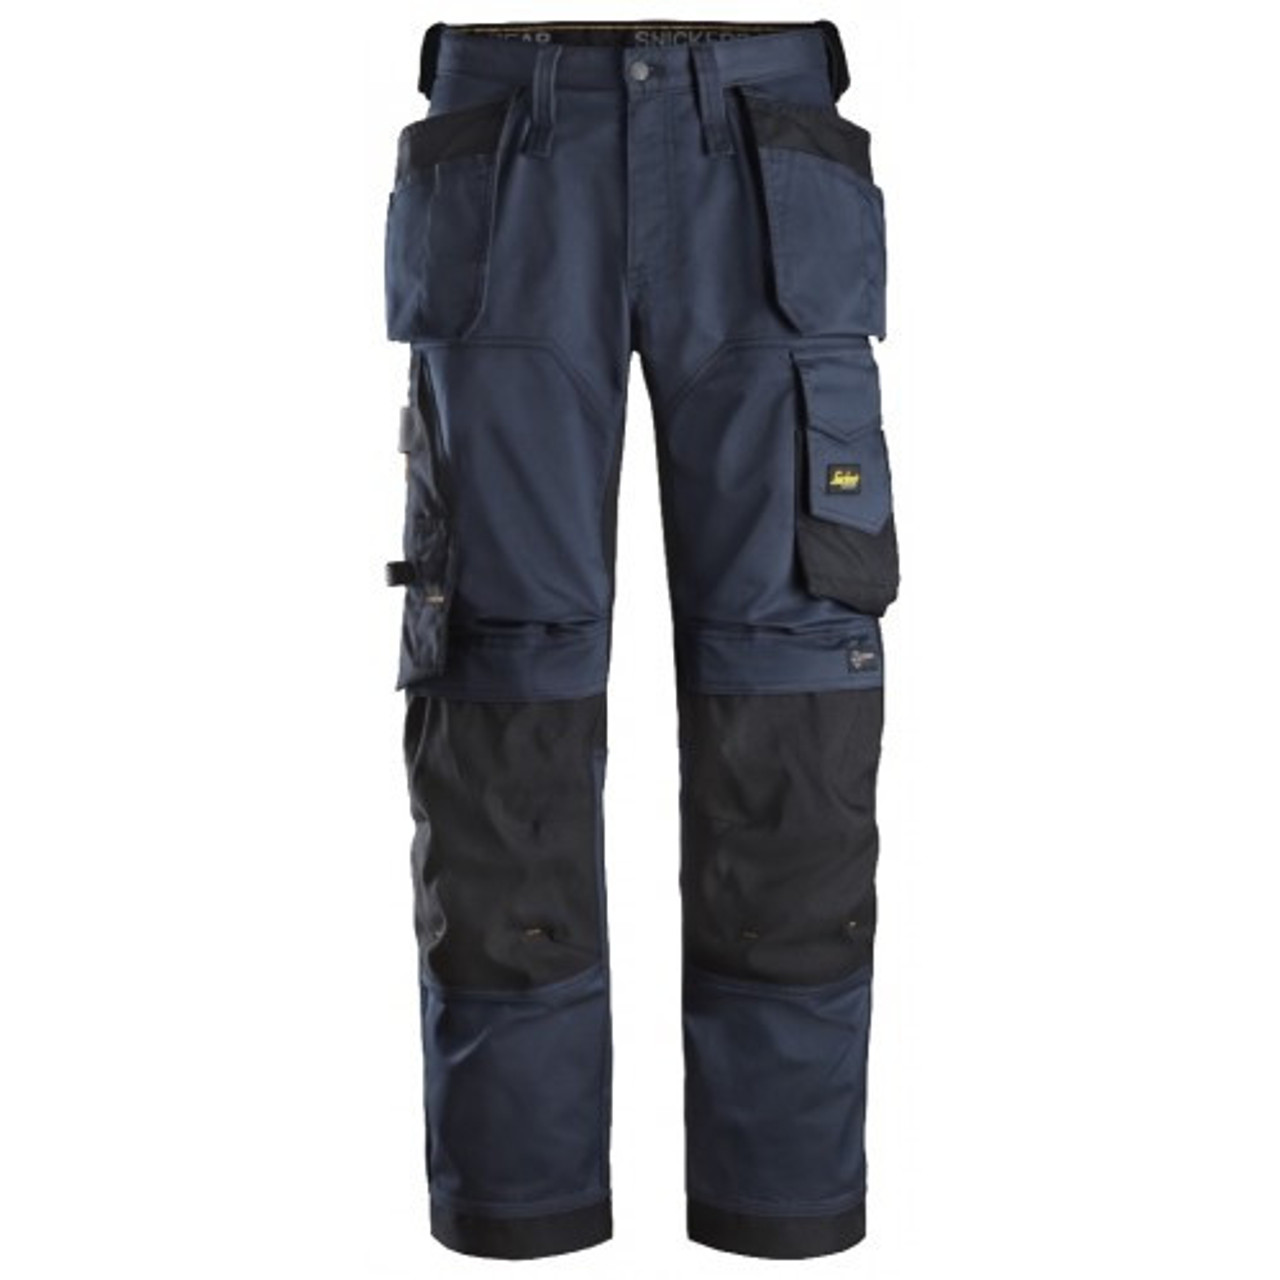 SNICKERS WORKWEAR Trousers | 6251 Navy Blue Trousers with Holster Pockets for Electricians, Plumbers in the Construction Industry